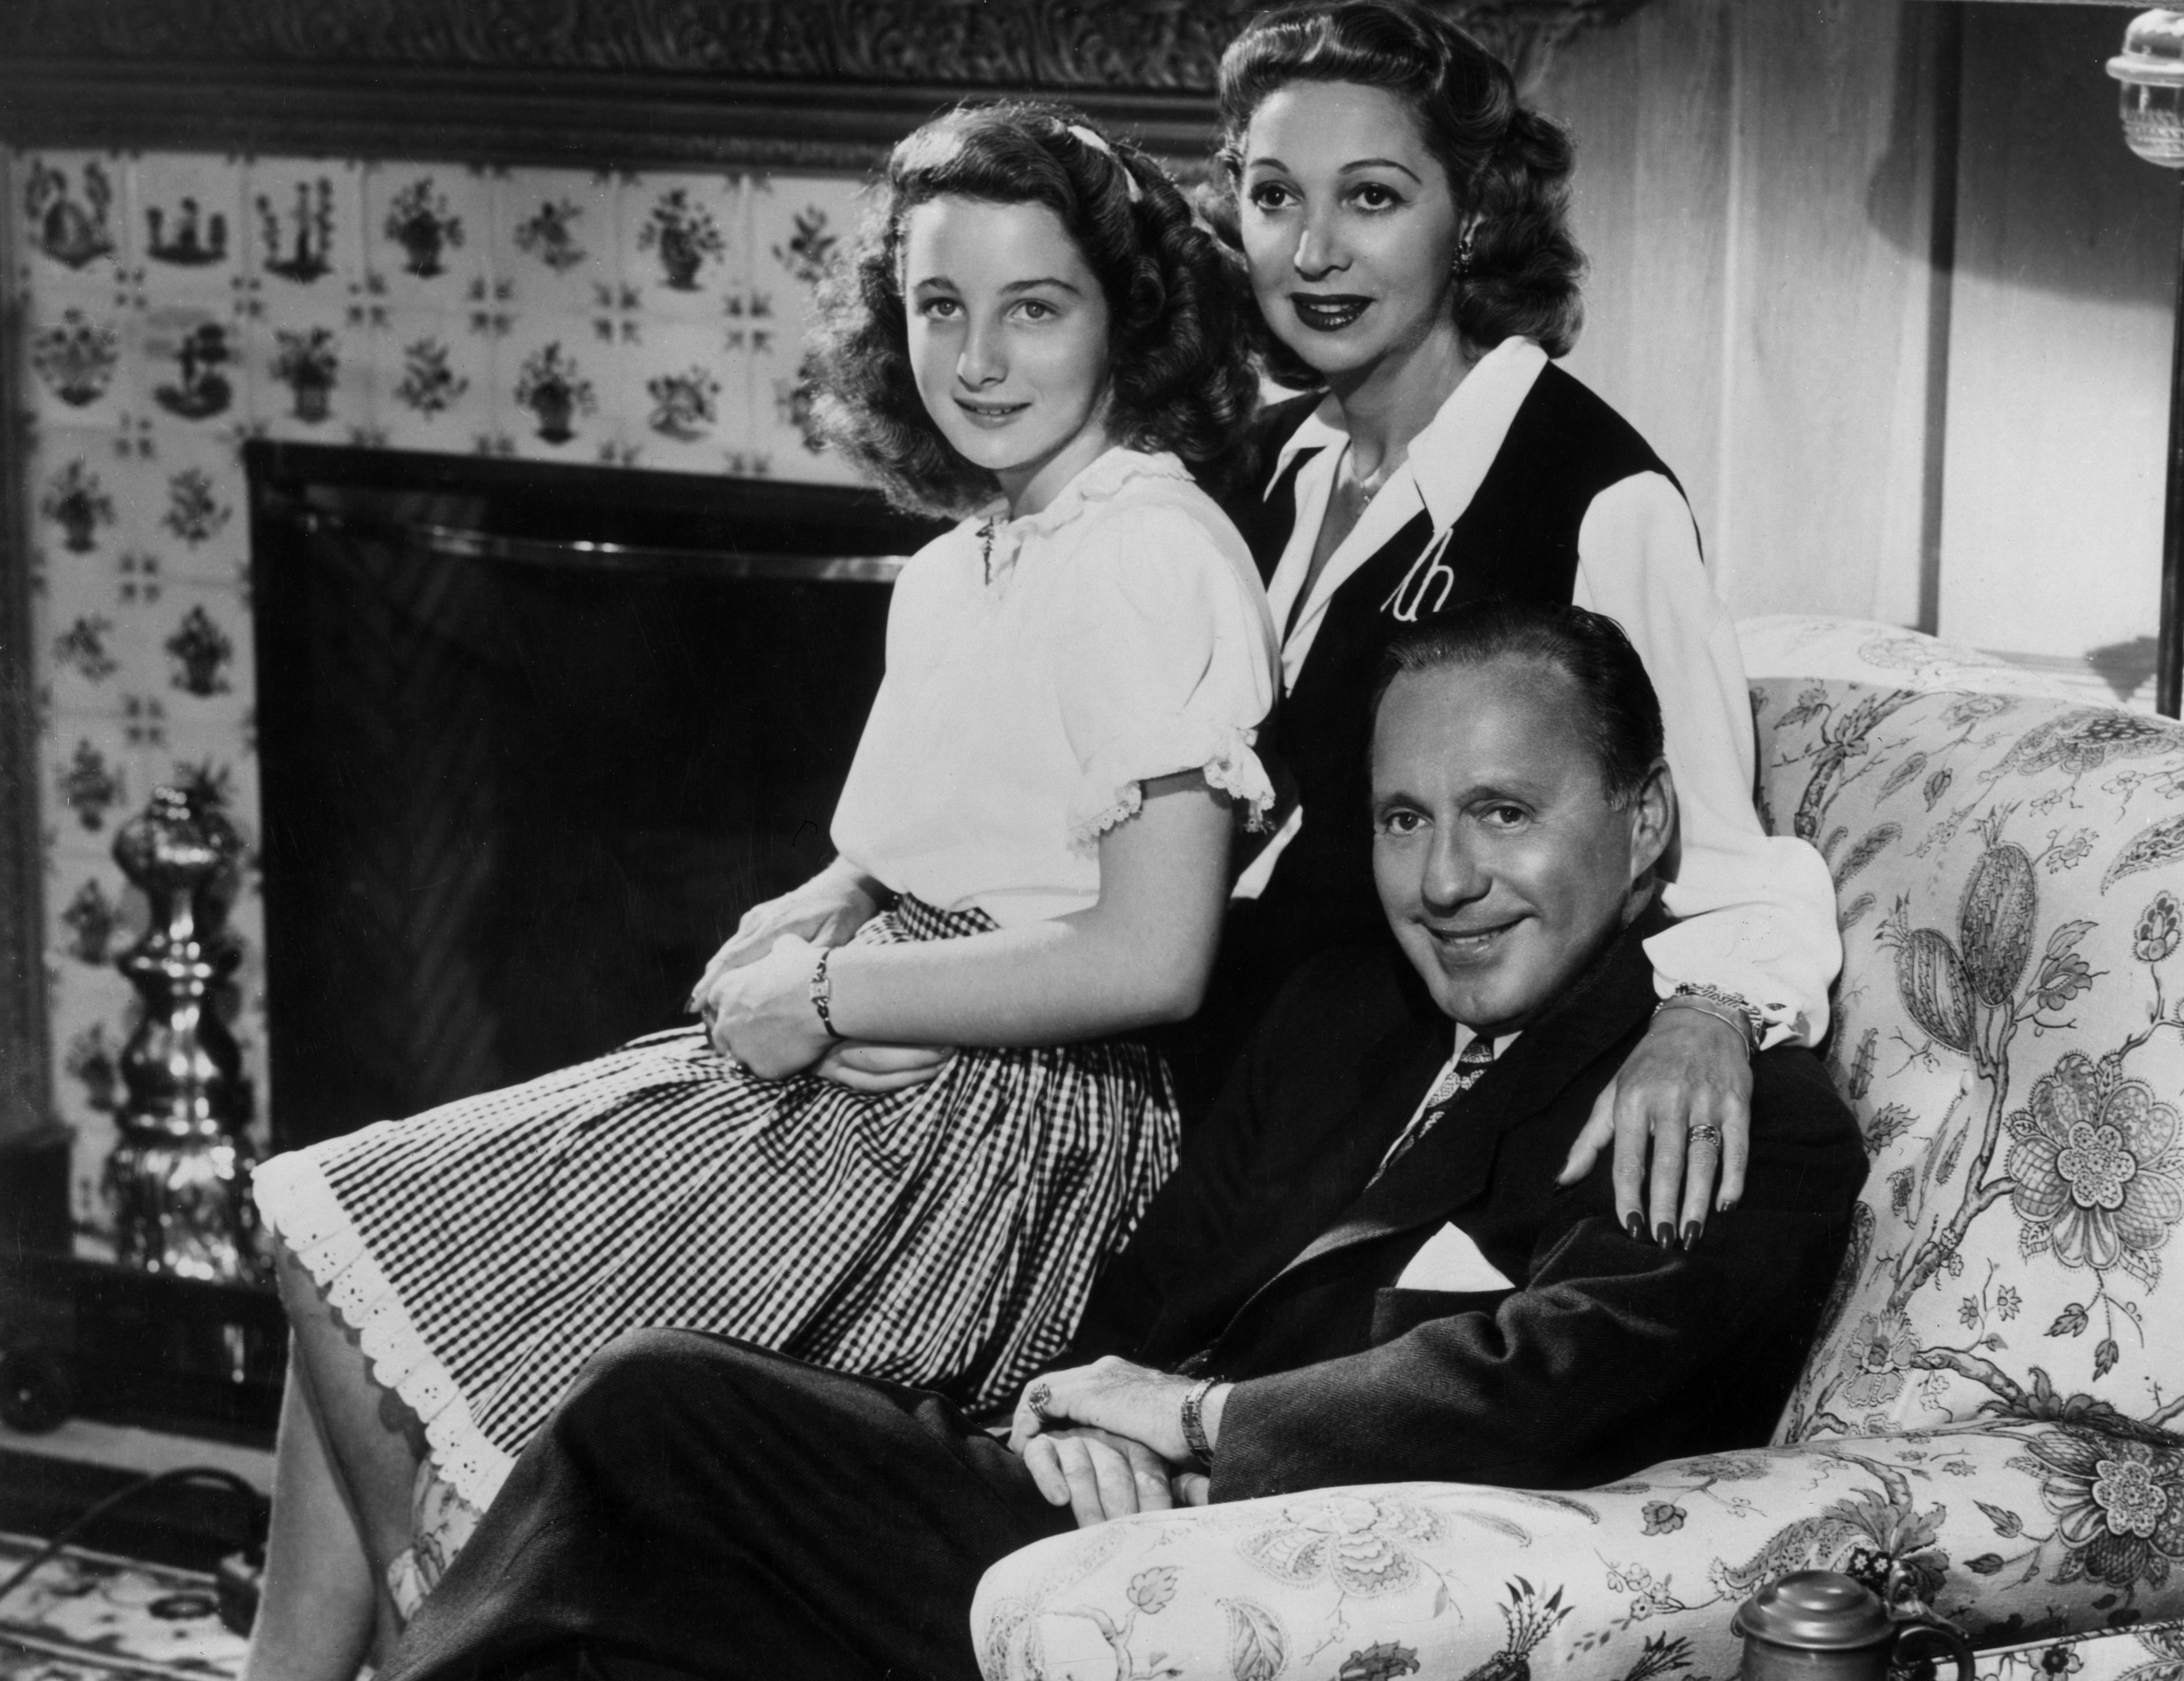 Family portrait of American comedian Jack Benny, his wife, Mary Livingstone, and their teenage daughter Joan Benny, seated together in a living room circa 1945 | Source: Getty Images